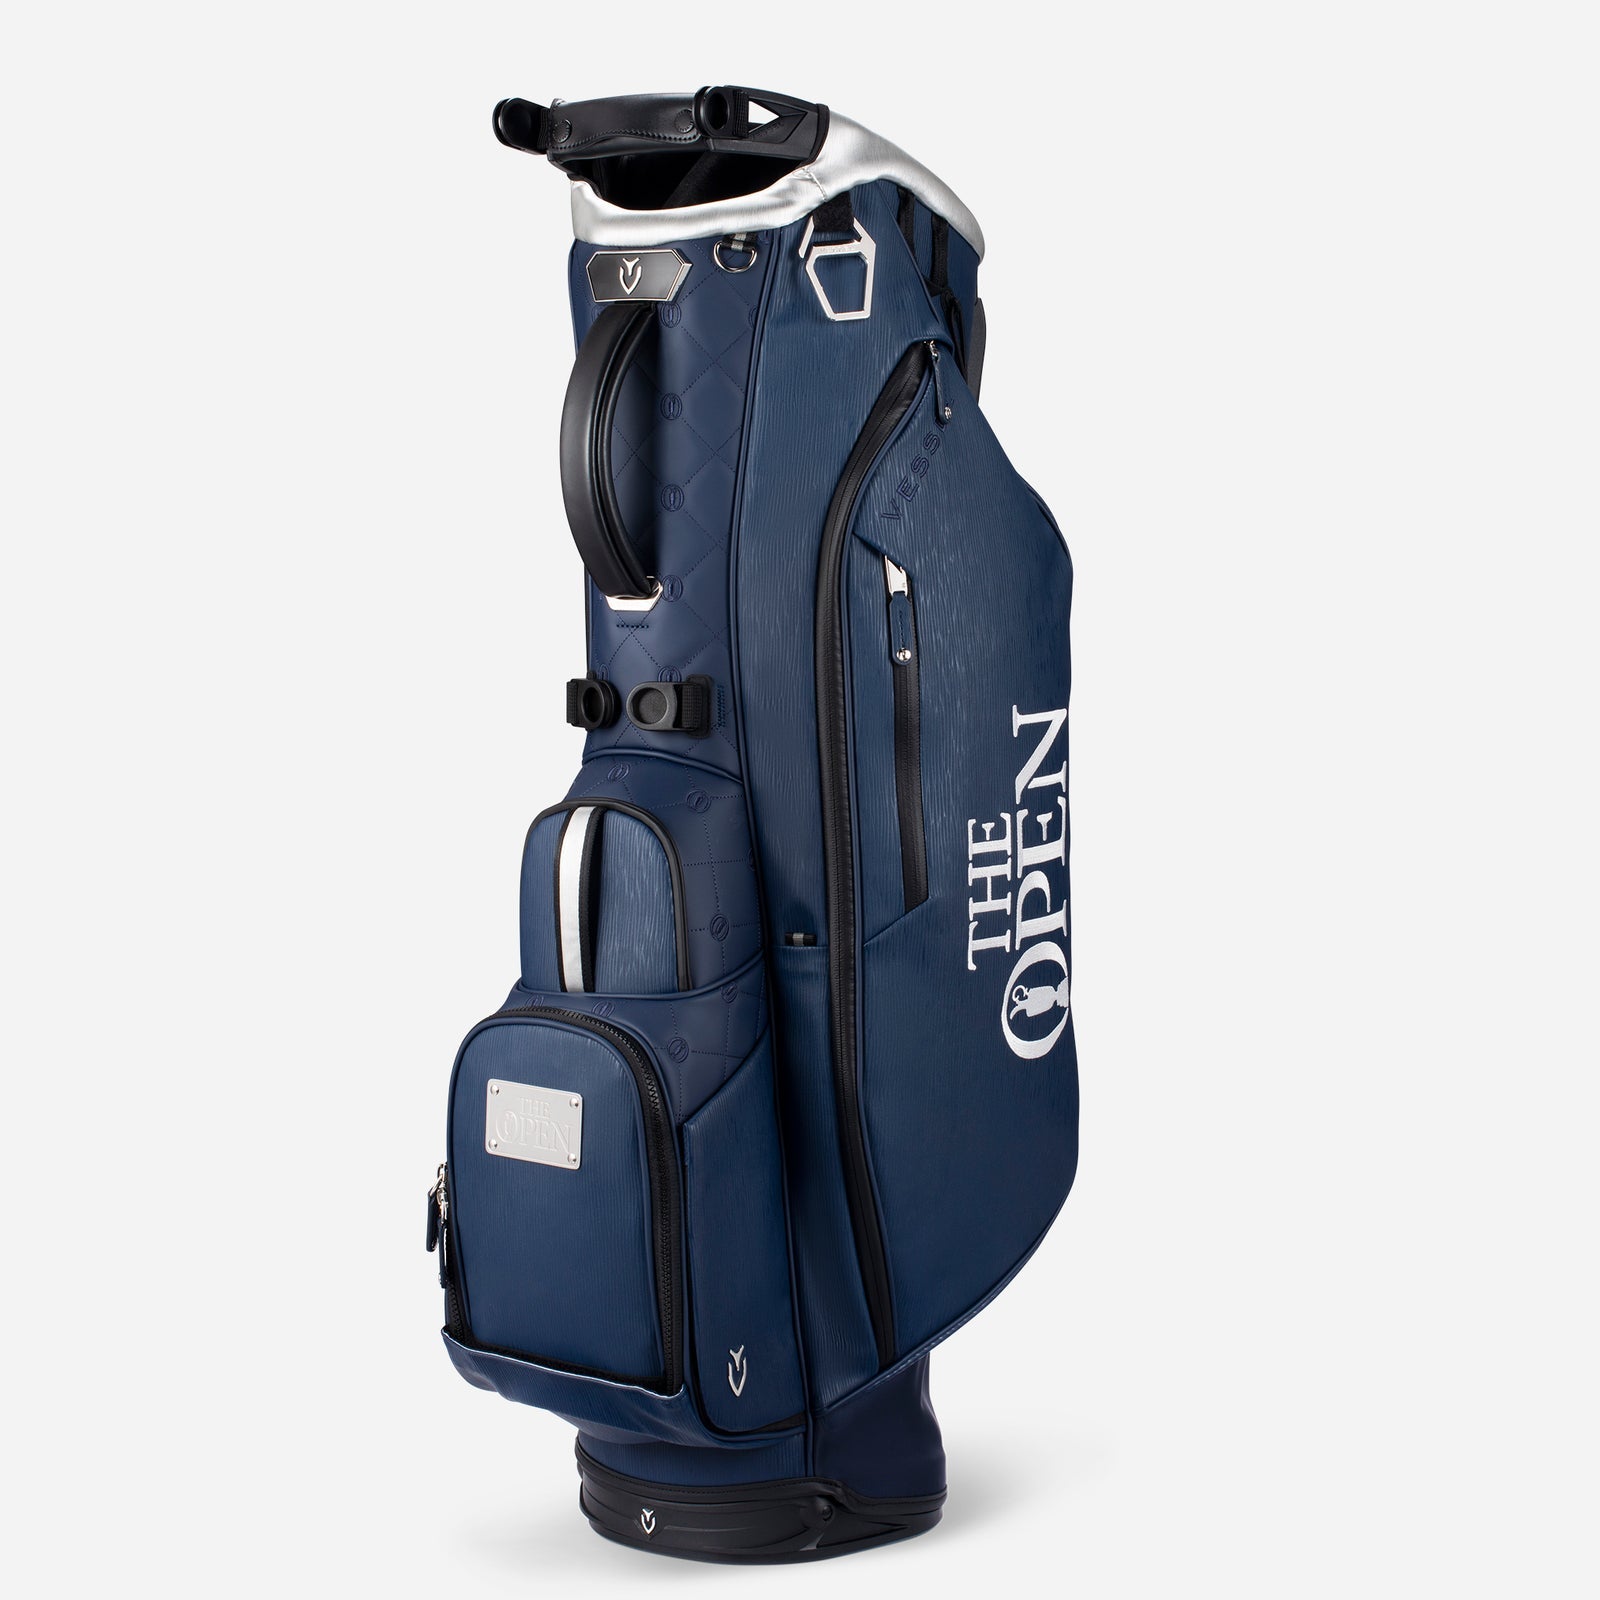 The Open x VESSEL Player IV Pro Stand